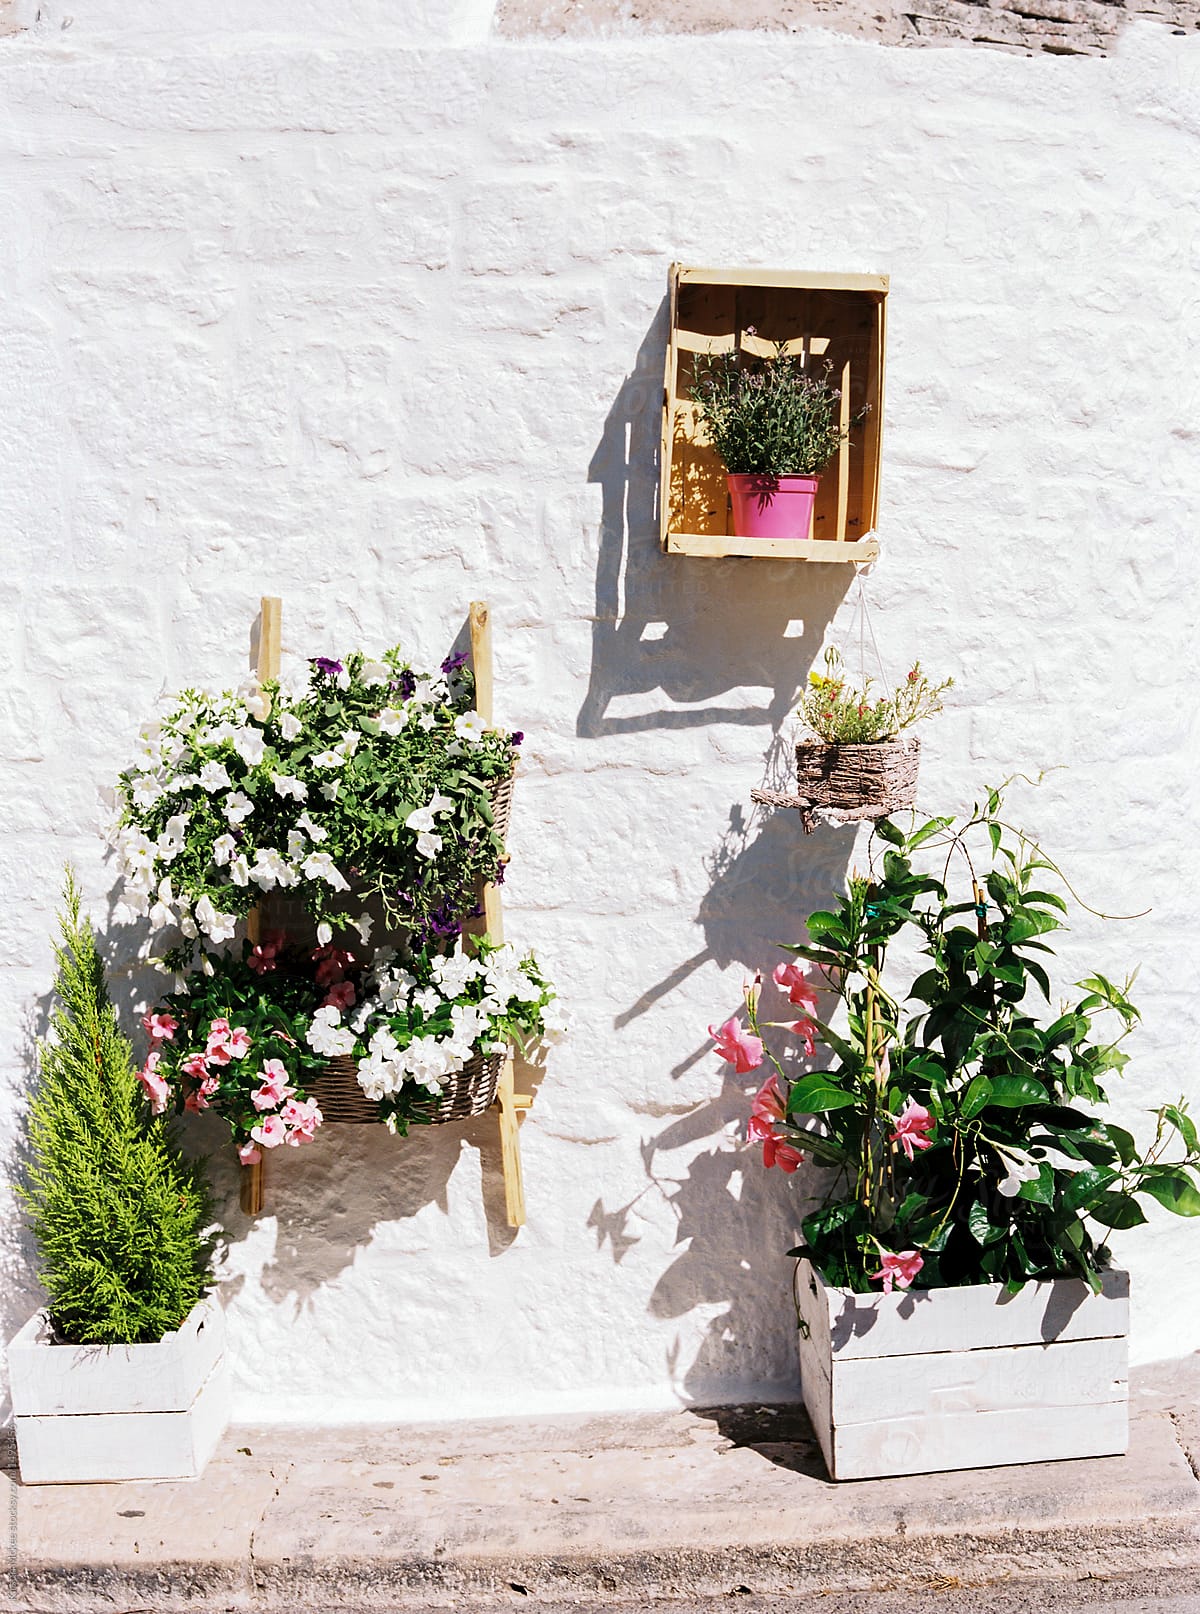 Flowers in boxes, Puglia